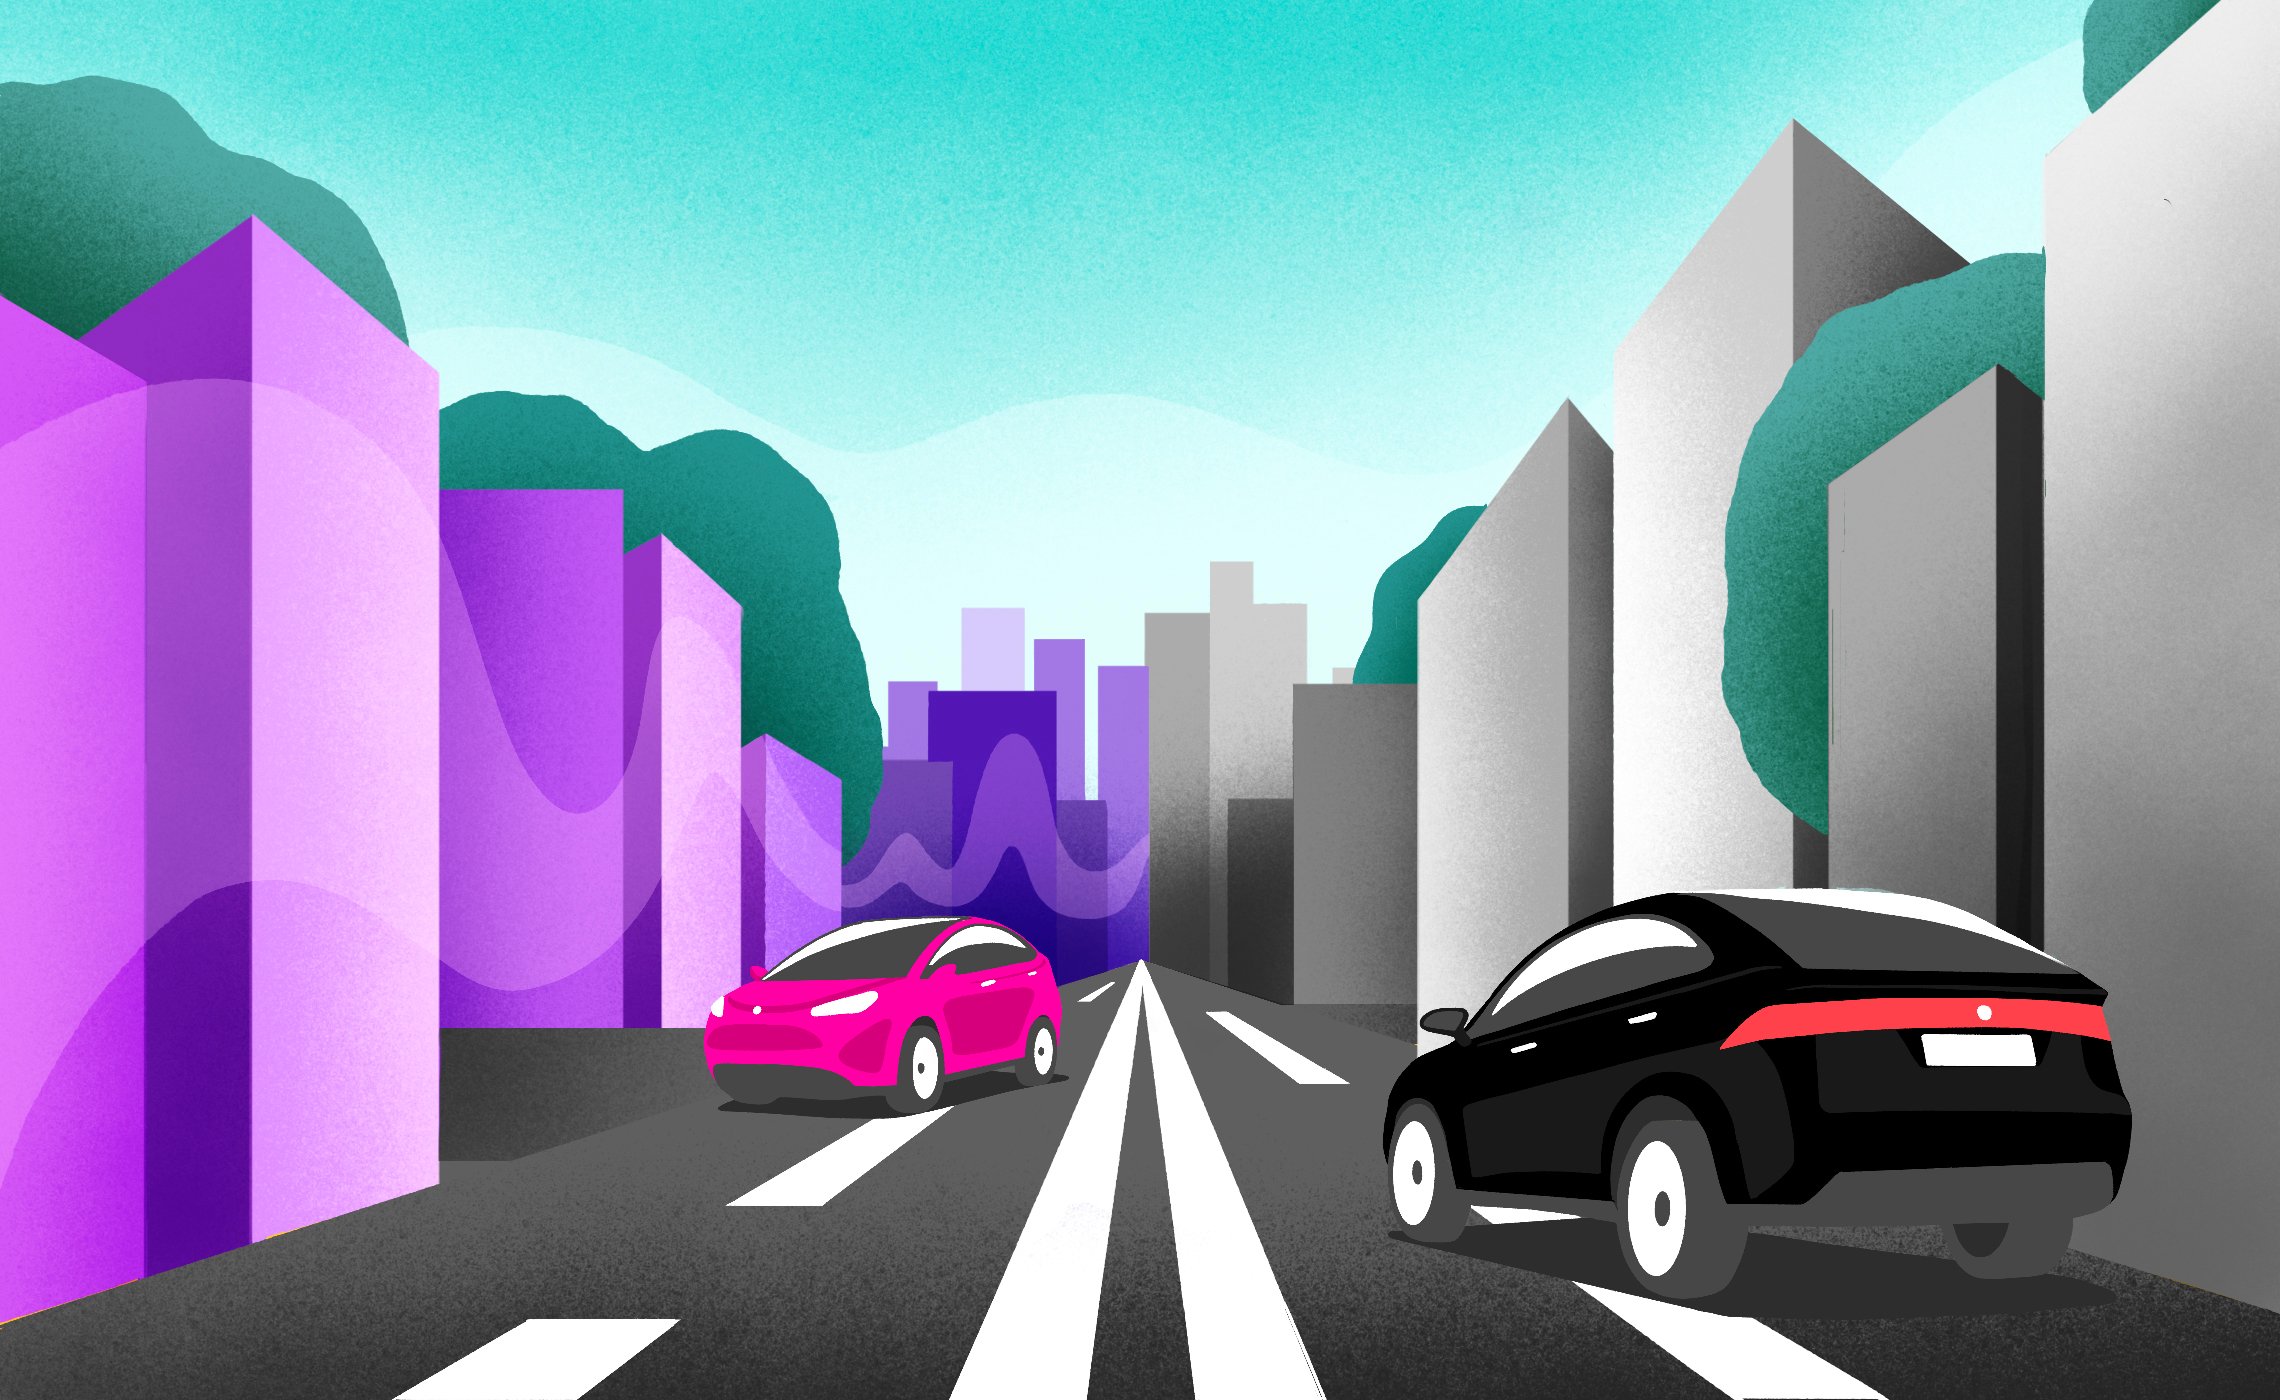 visual elements of a pink Lyft car and black Uber car